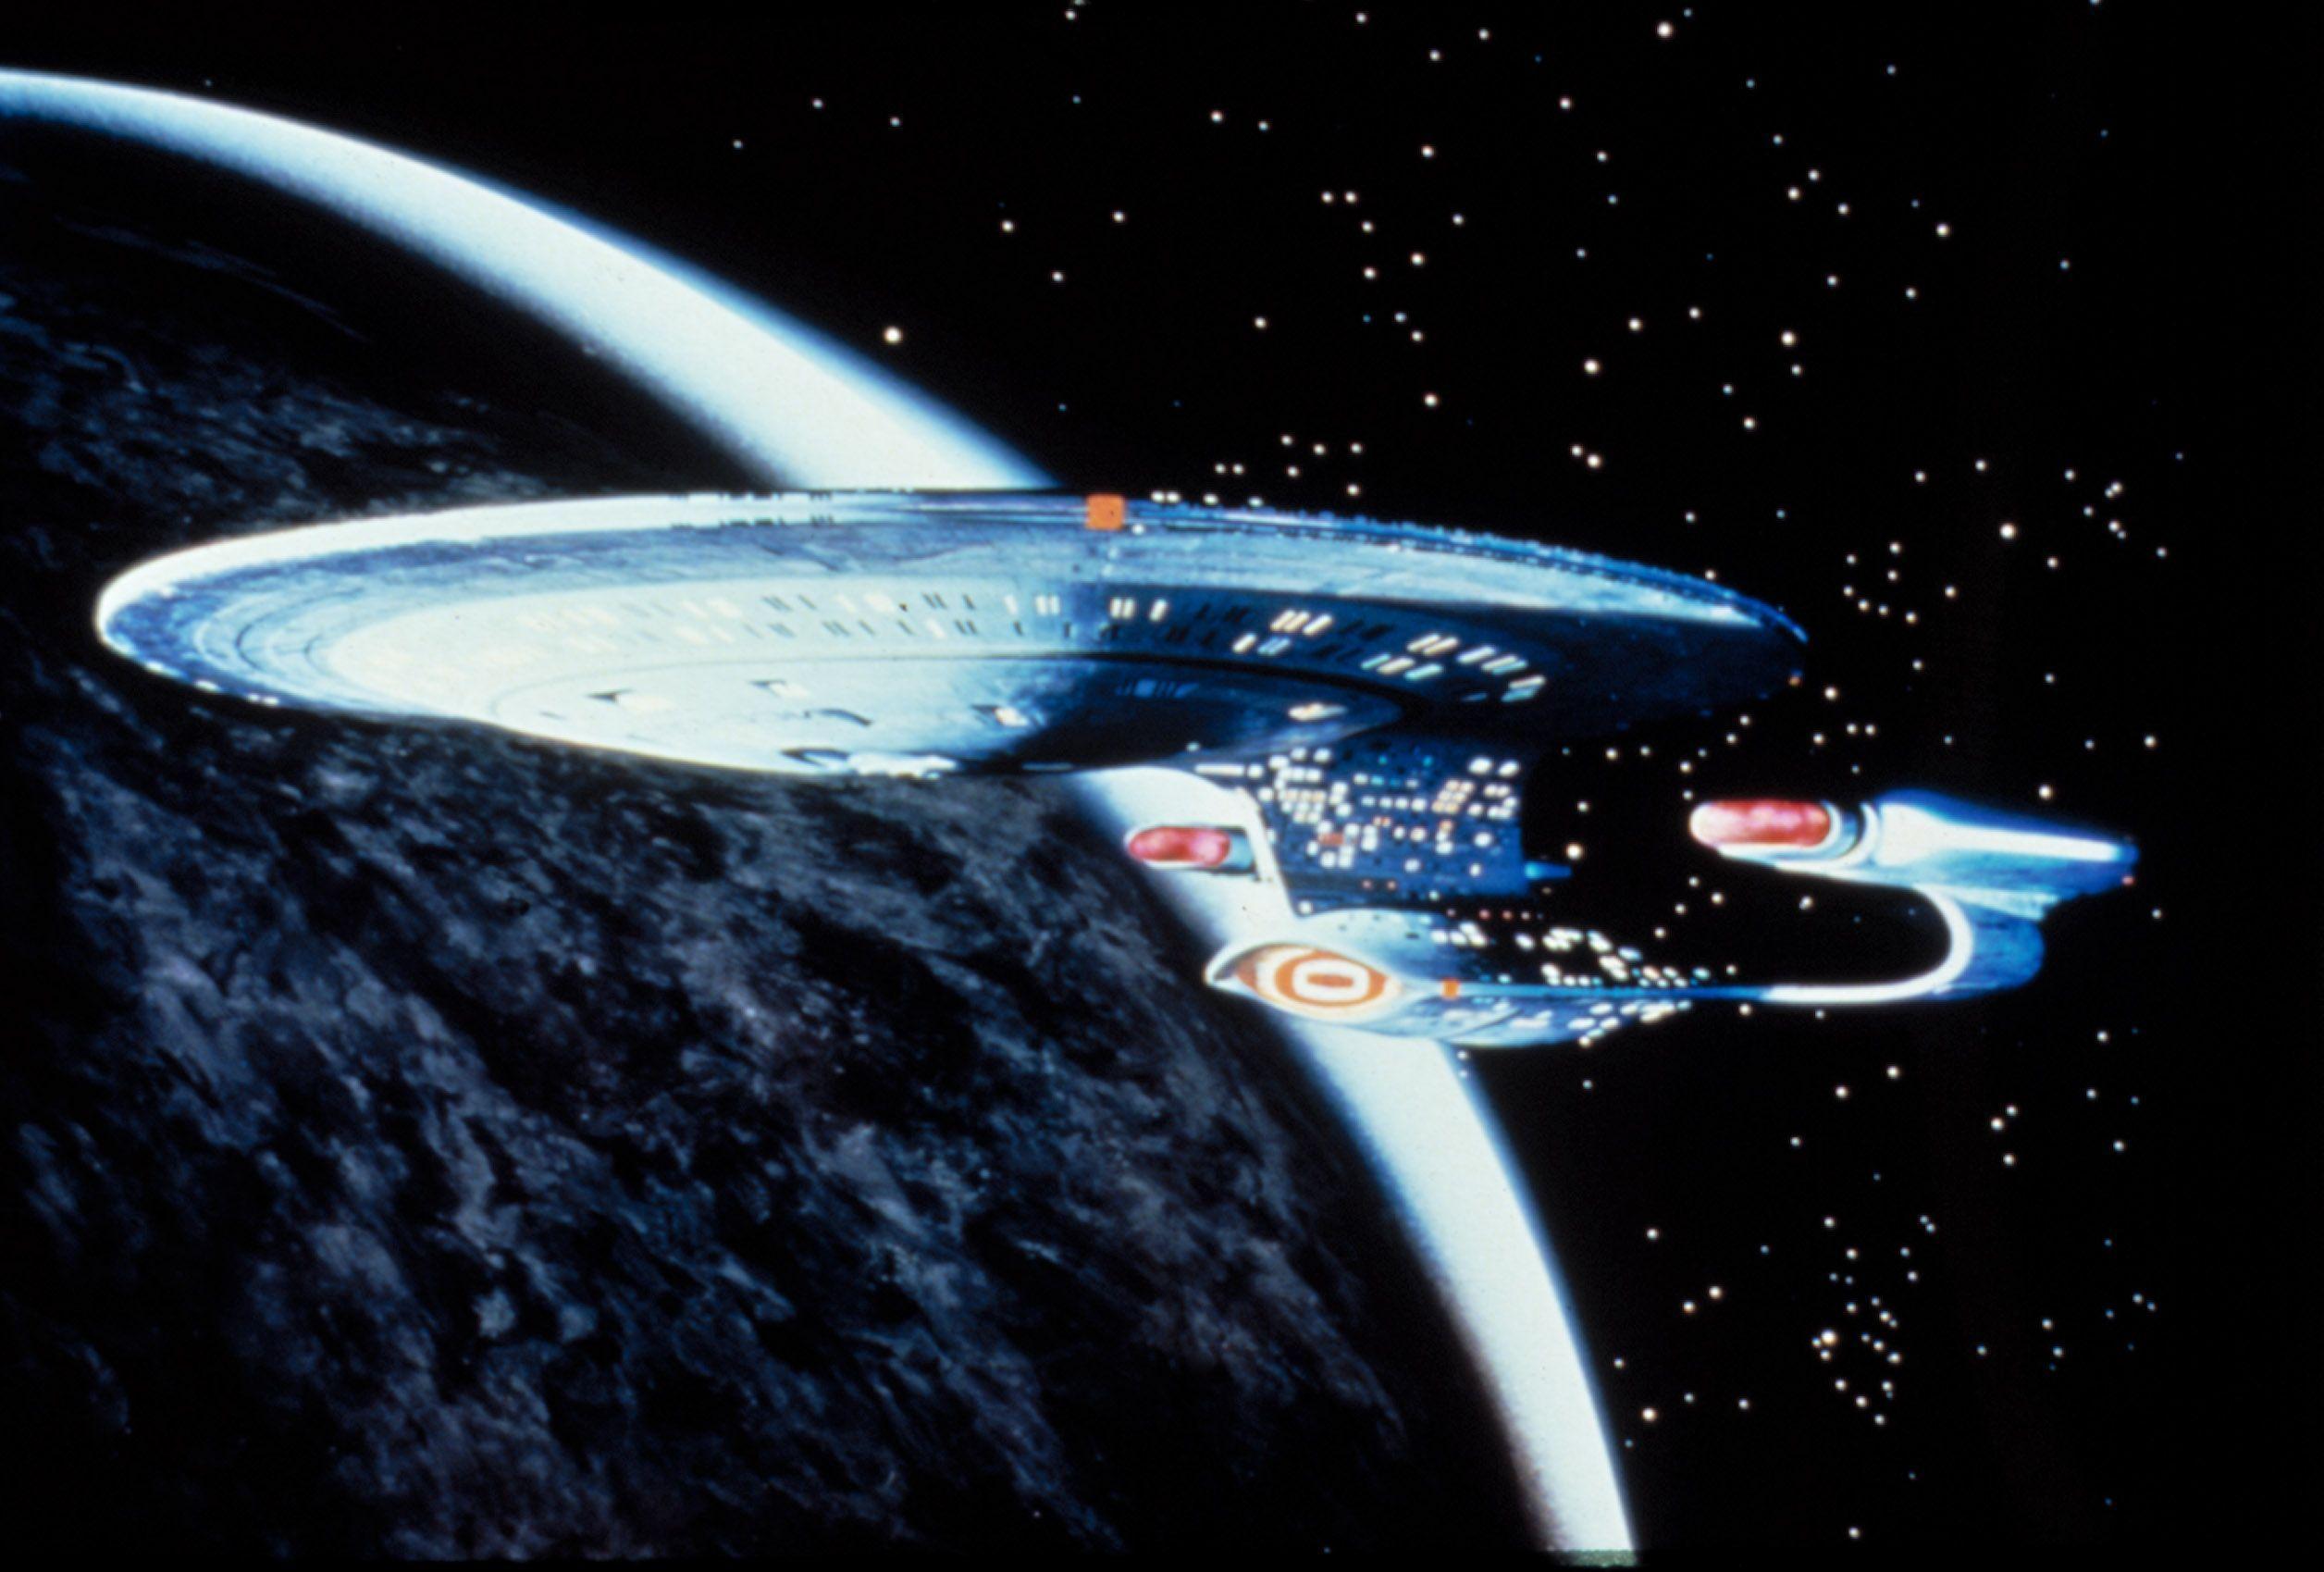 USS Enterprise D
from Star Trek TNG
taking us into the future
